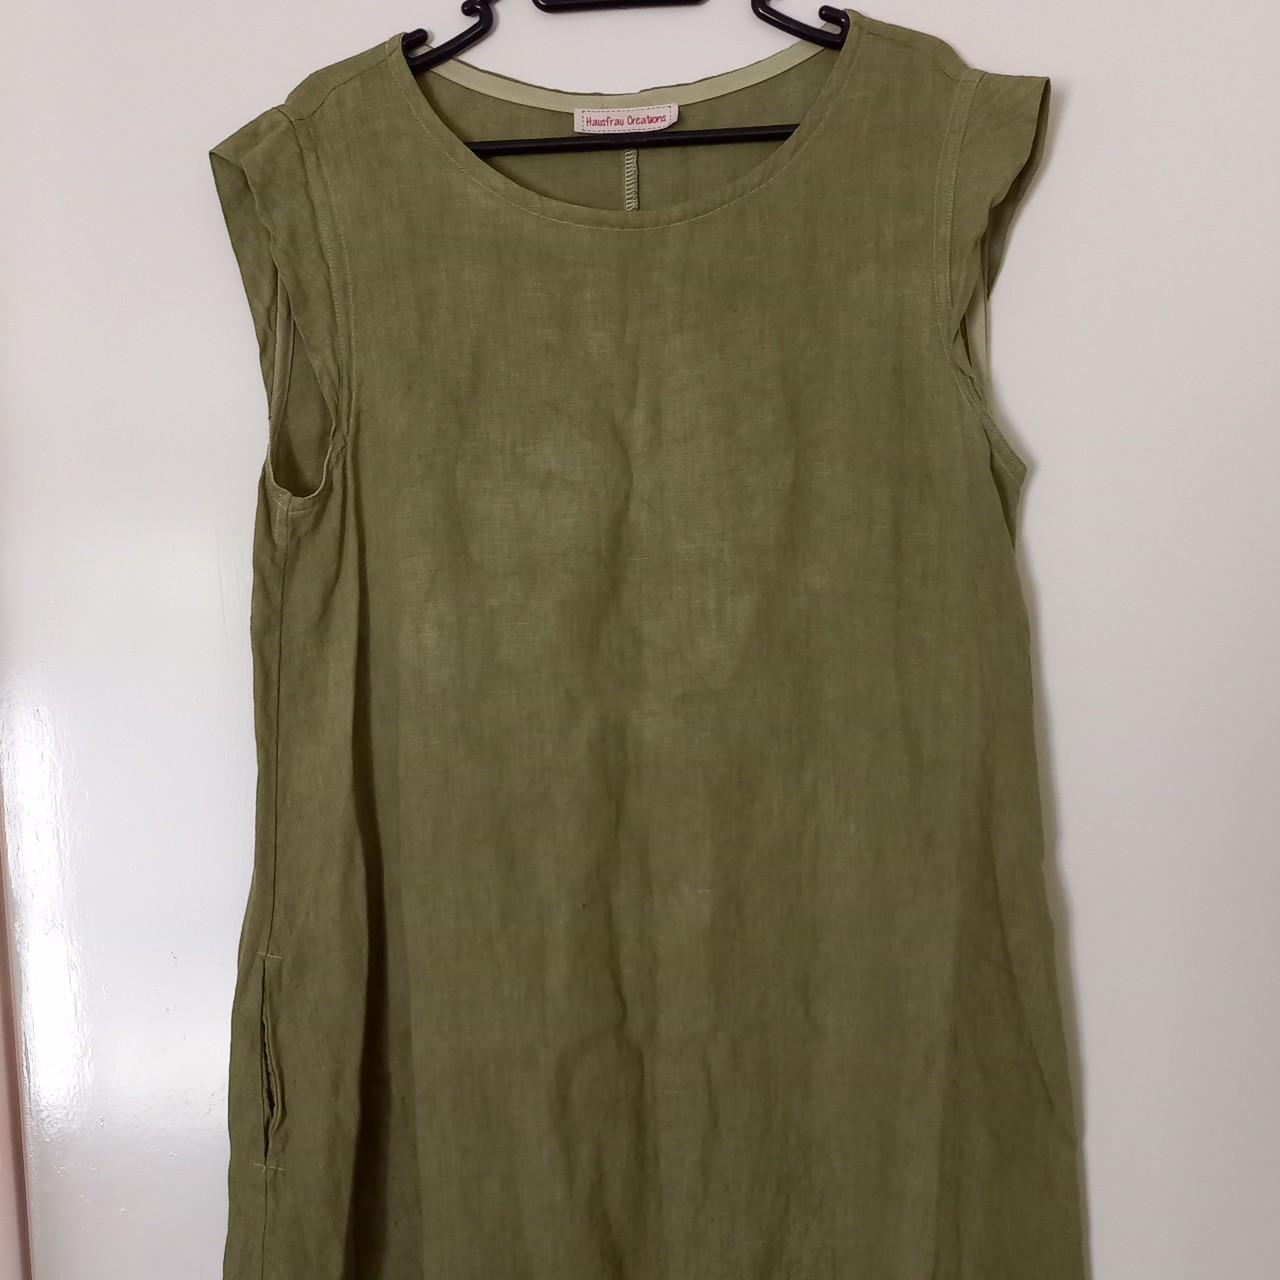 Mottled forest green dress. Features cap sleeves and... - Depop